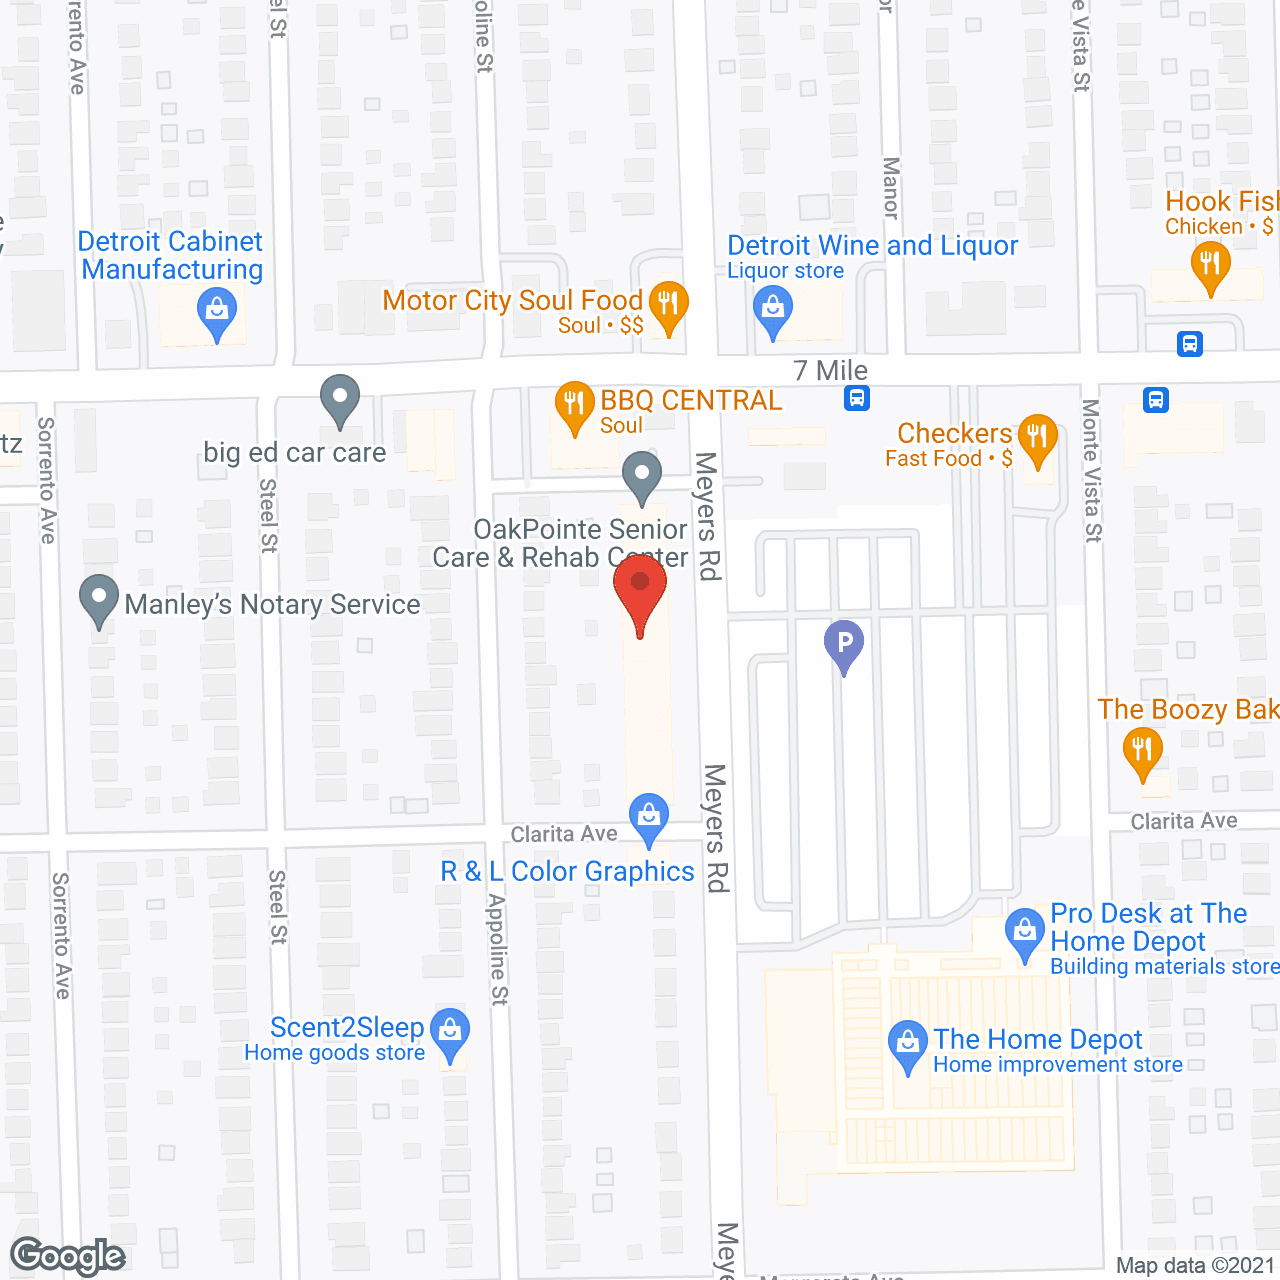 OakPointe Senior Care and Rehab Center in google map